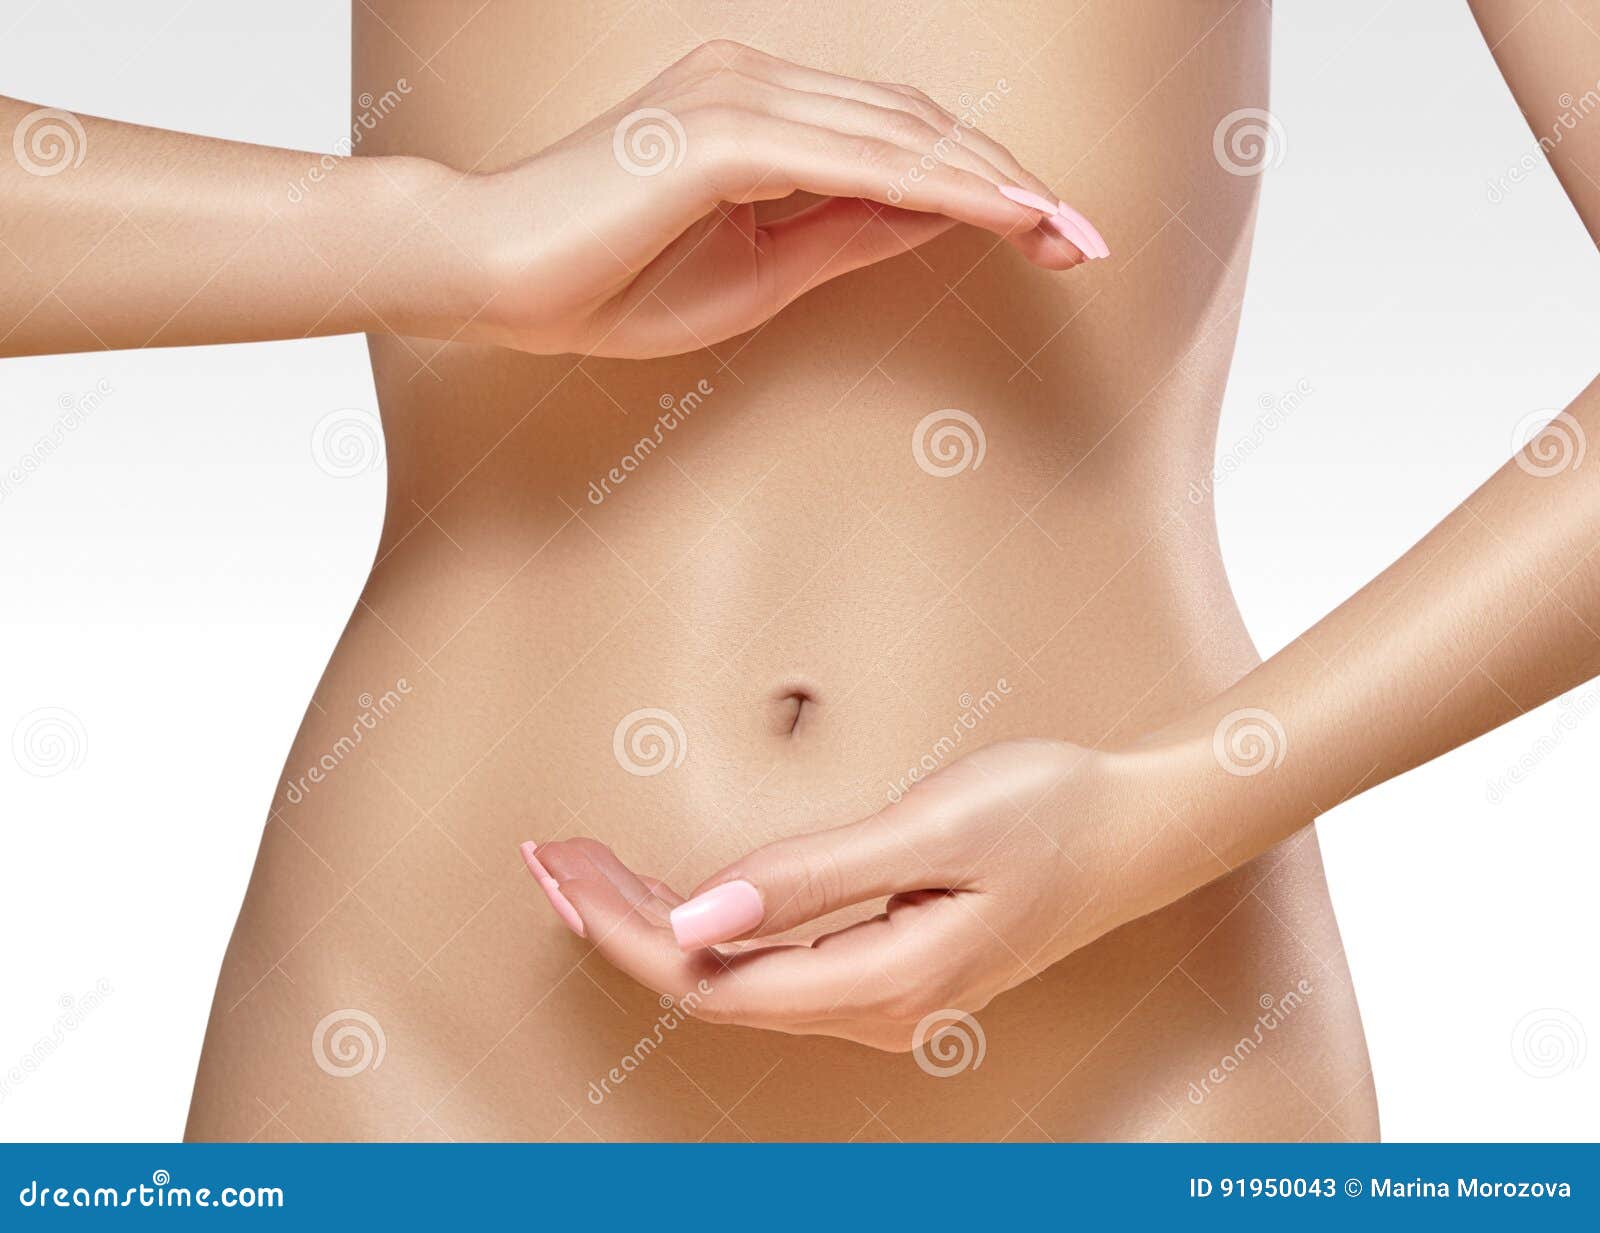 beautiful female belly. pretty woman cares stomach. healthcare, digestion, intestinal health. wellness, spa. body part